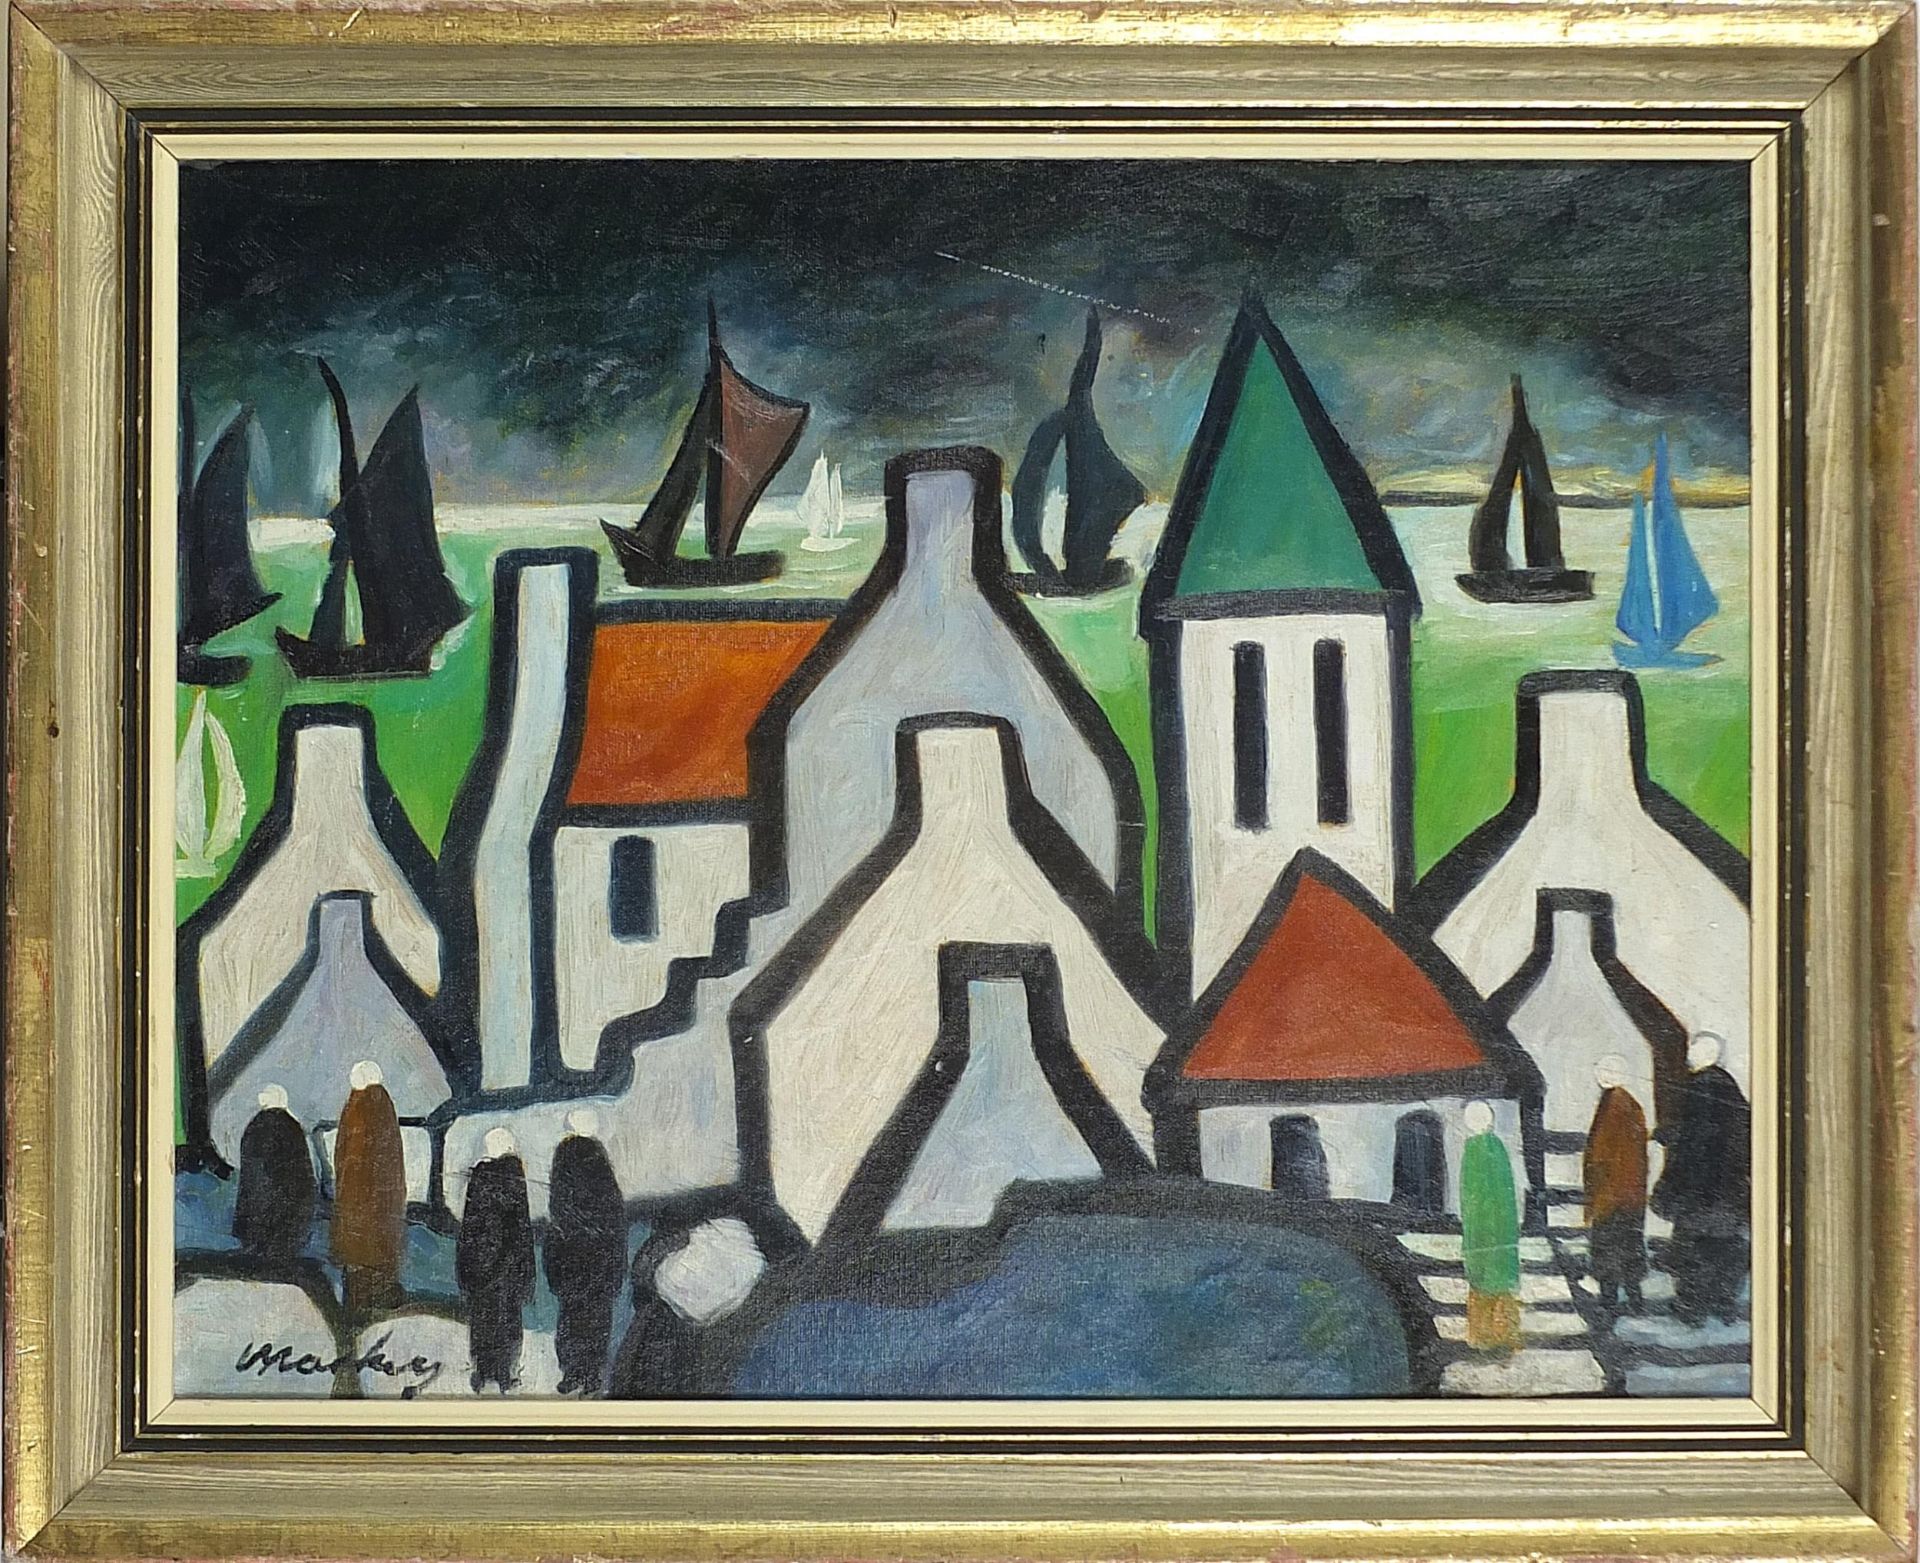 Manner of Markey Robinson - Cottages before water and boats, Irish school oil on board, mounted - Image 2 of 4